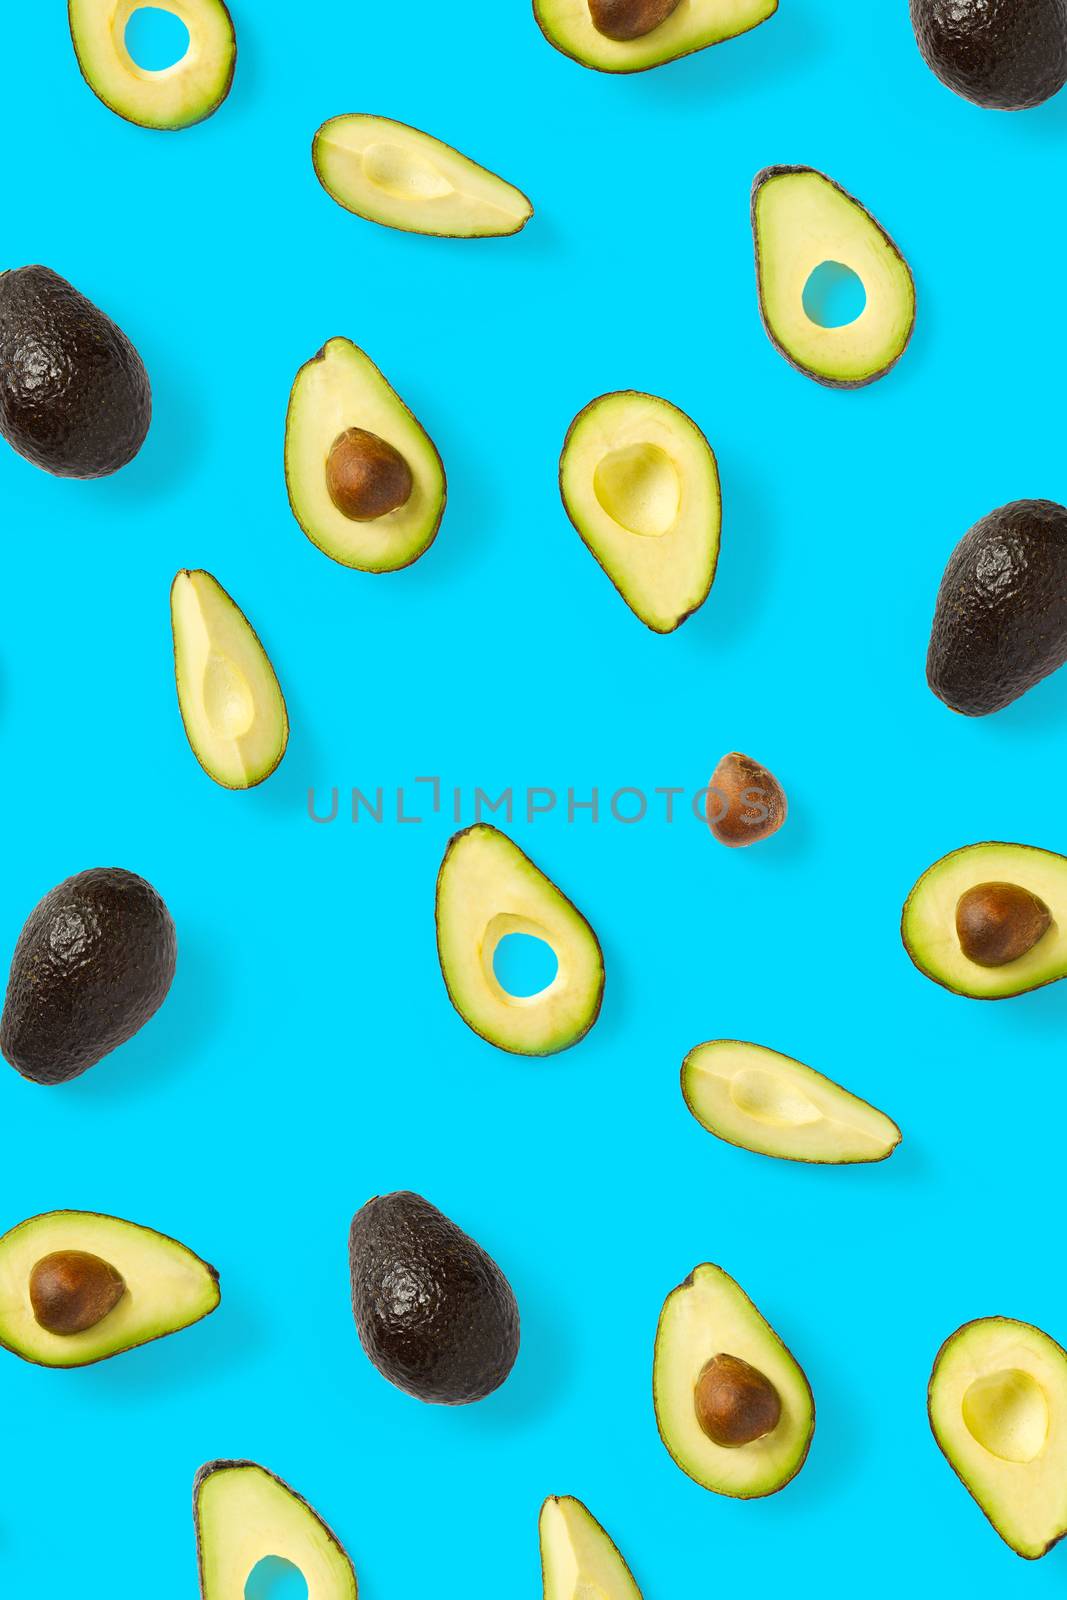 Avocado. Background made from isolated Avocado pieces on blue background. Flat lay of fresh ripe avocados and avacado pieces. by PhotoTime